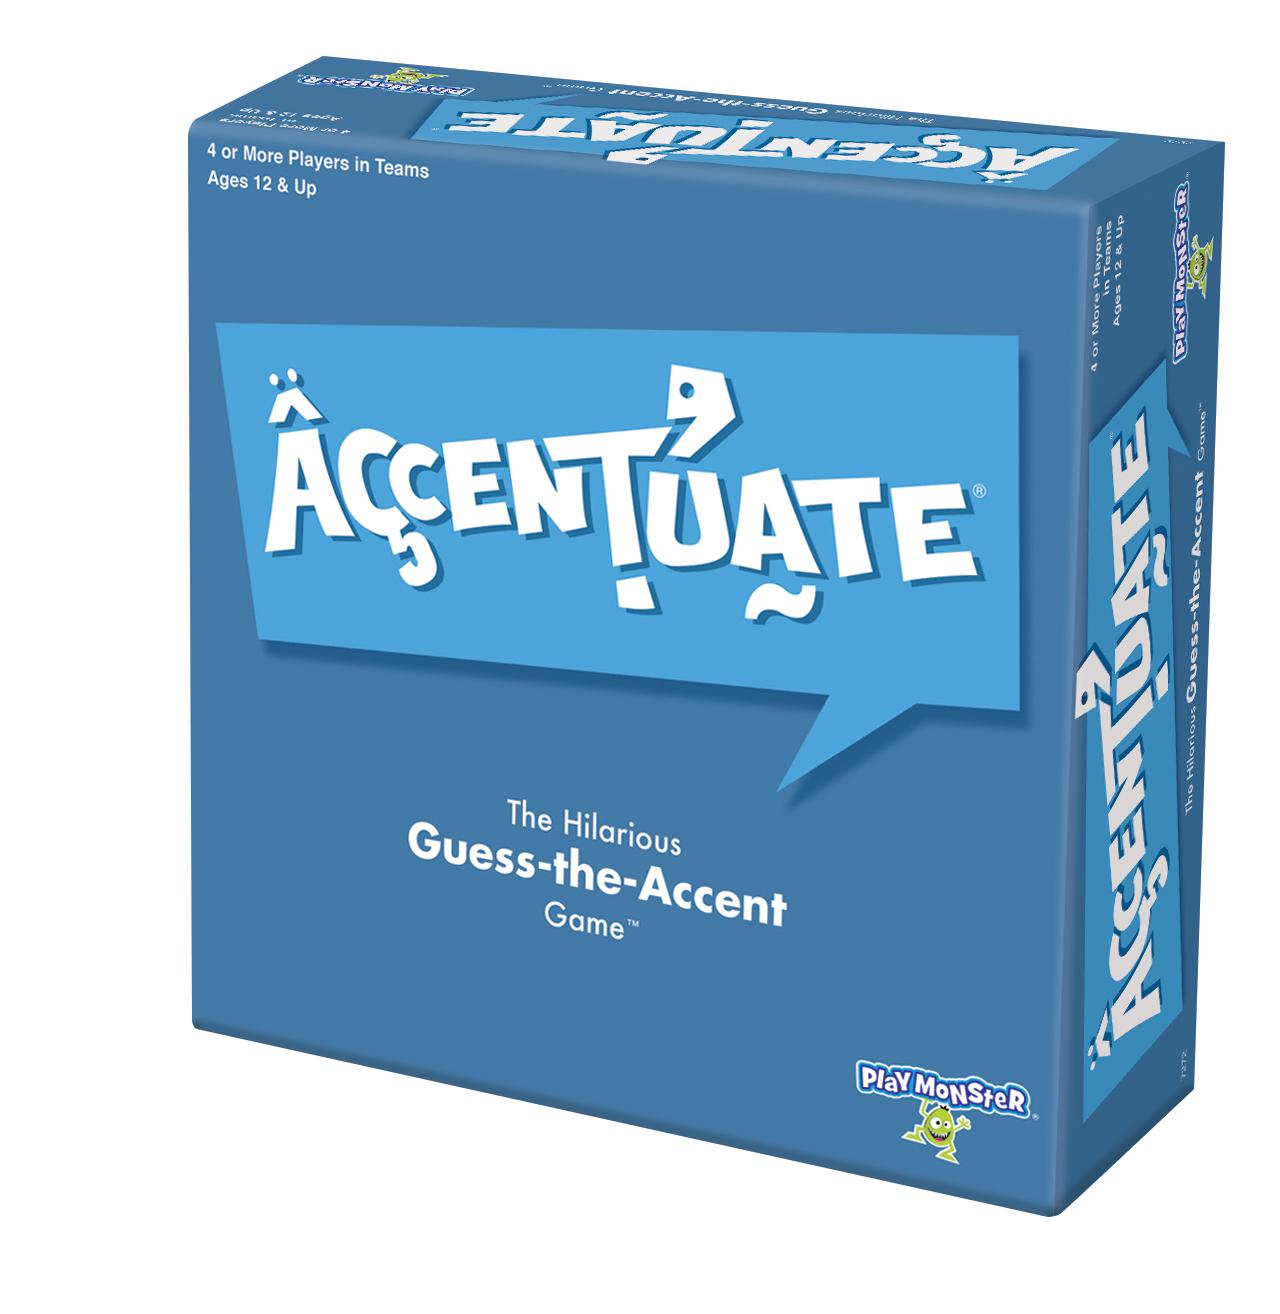 Play Monster Accentuate Game 7272